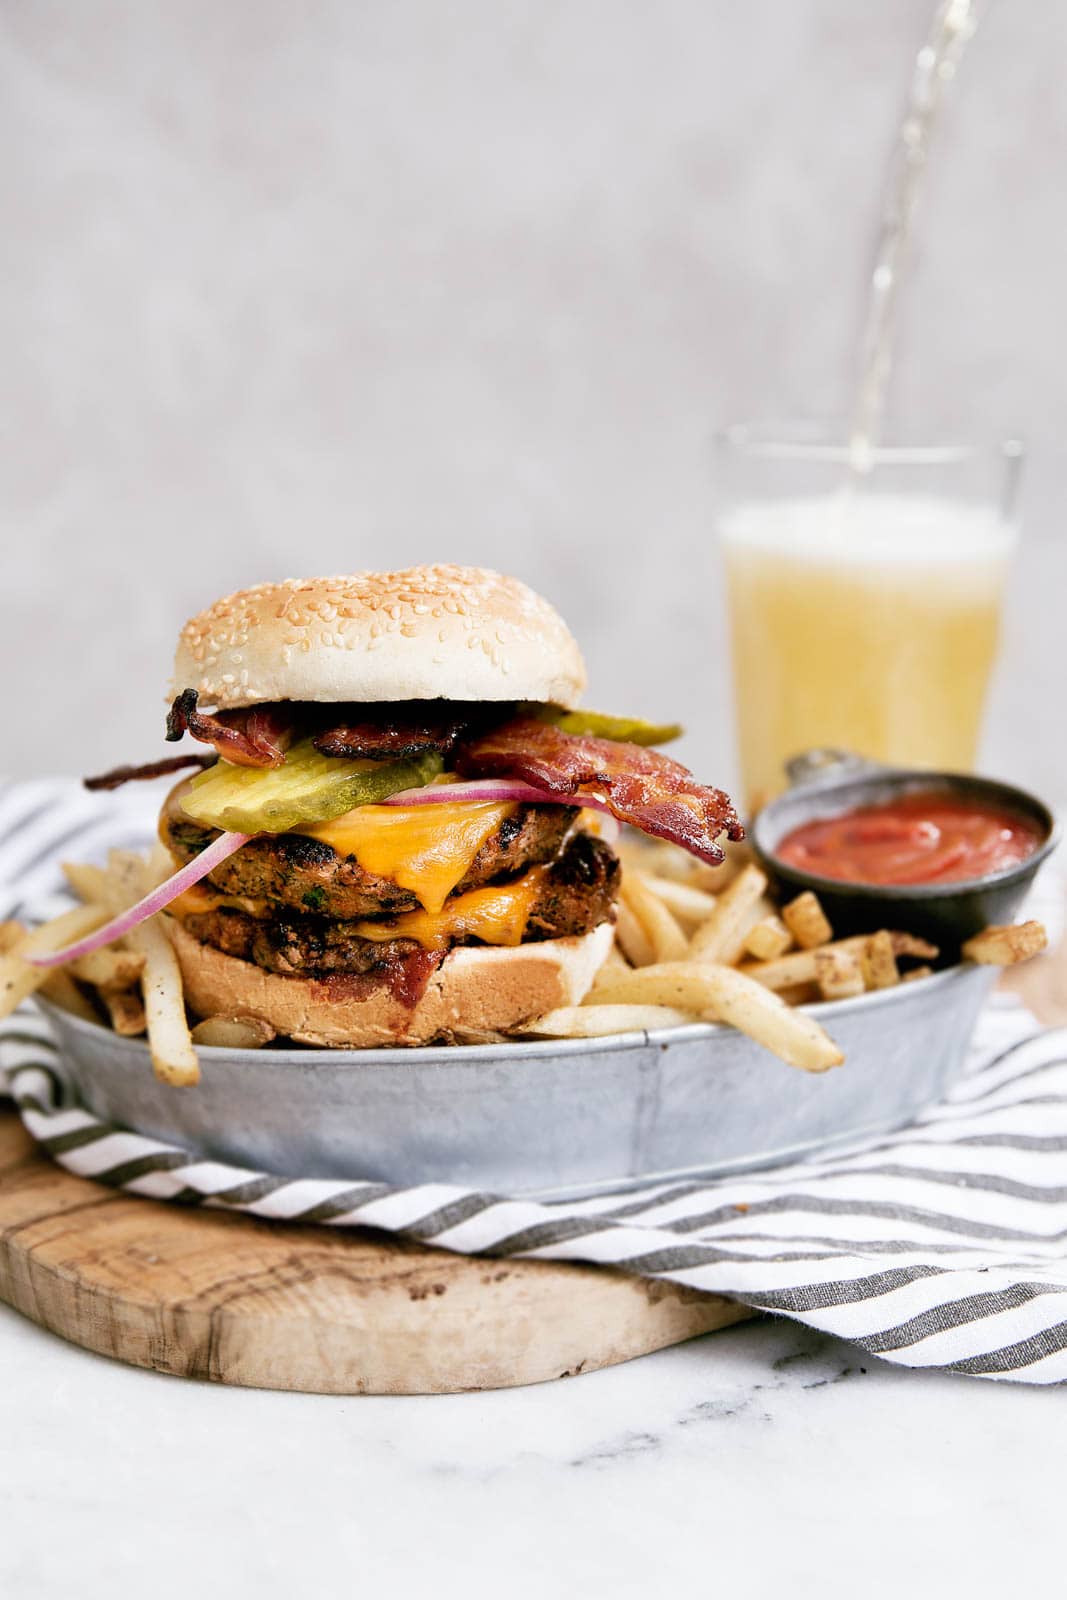 Bourbon, bacon, and BBQ sauce walk into a burger... happiness ensues.